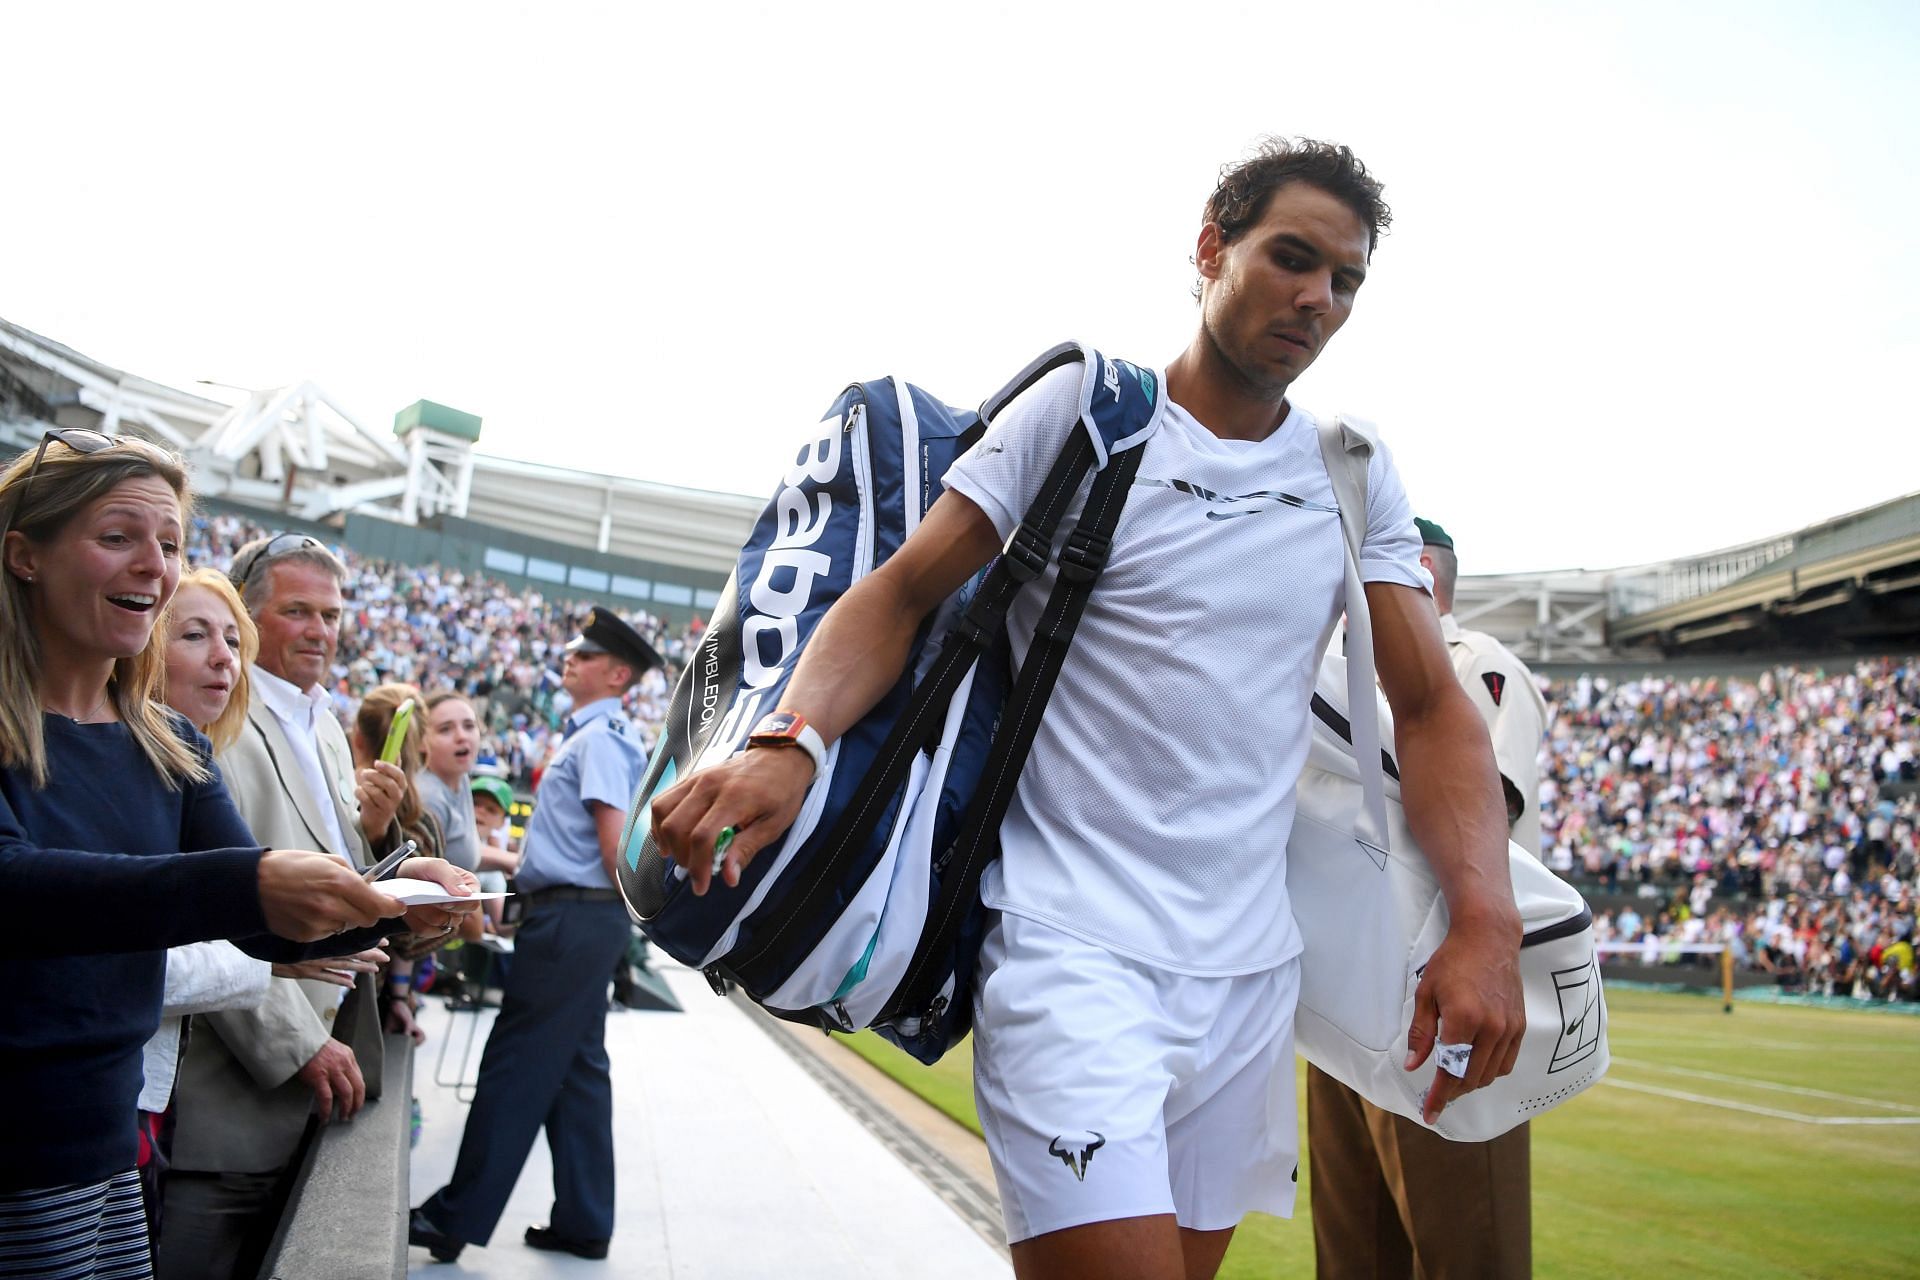 Rafael Nadal&#039;s Wimbledon participation depends on the success of the treatment for his foot